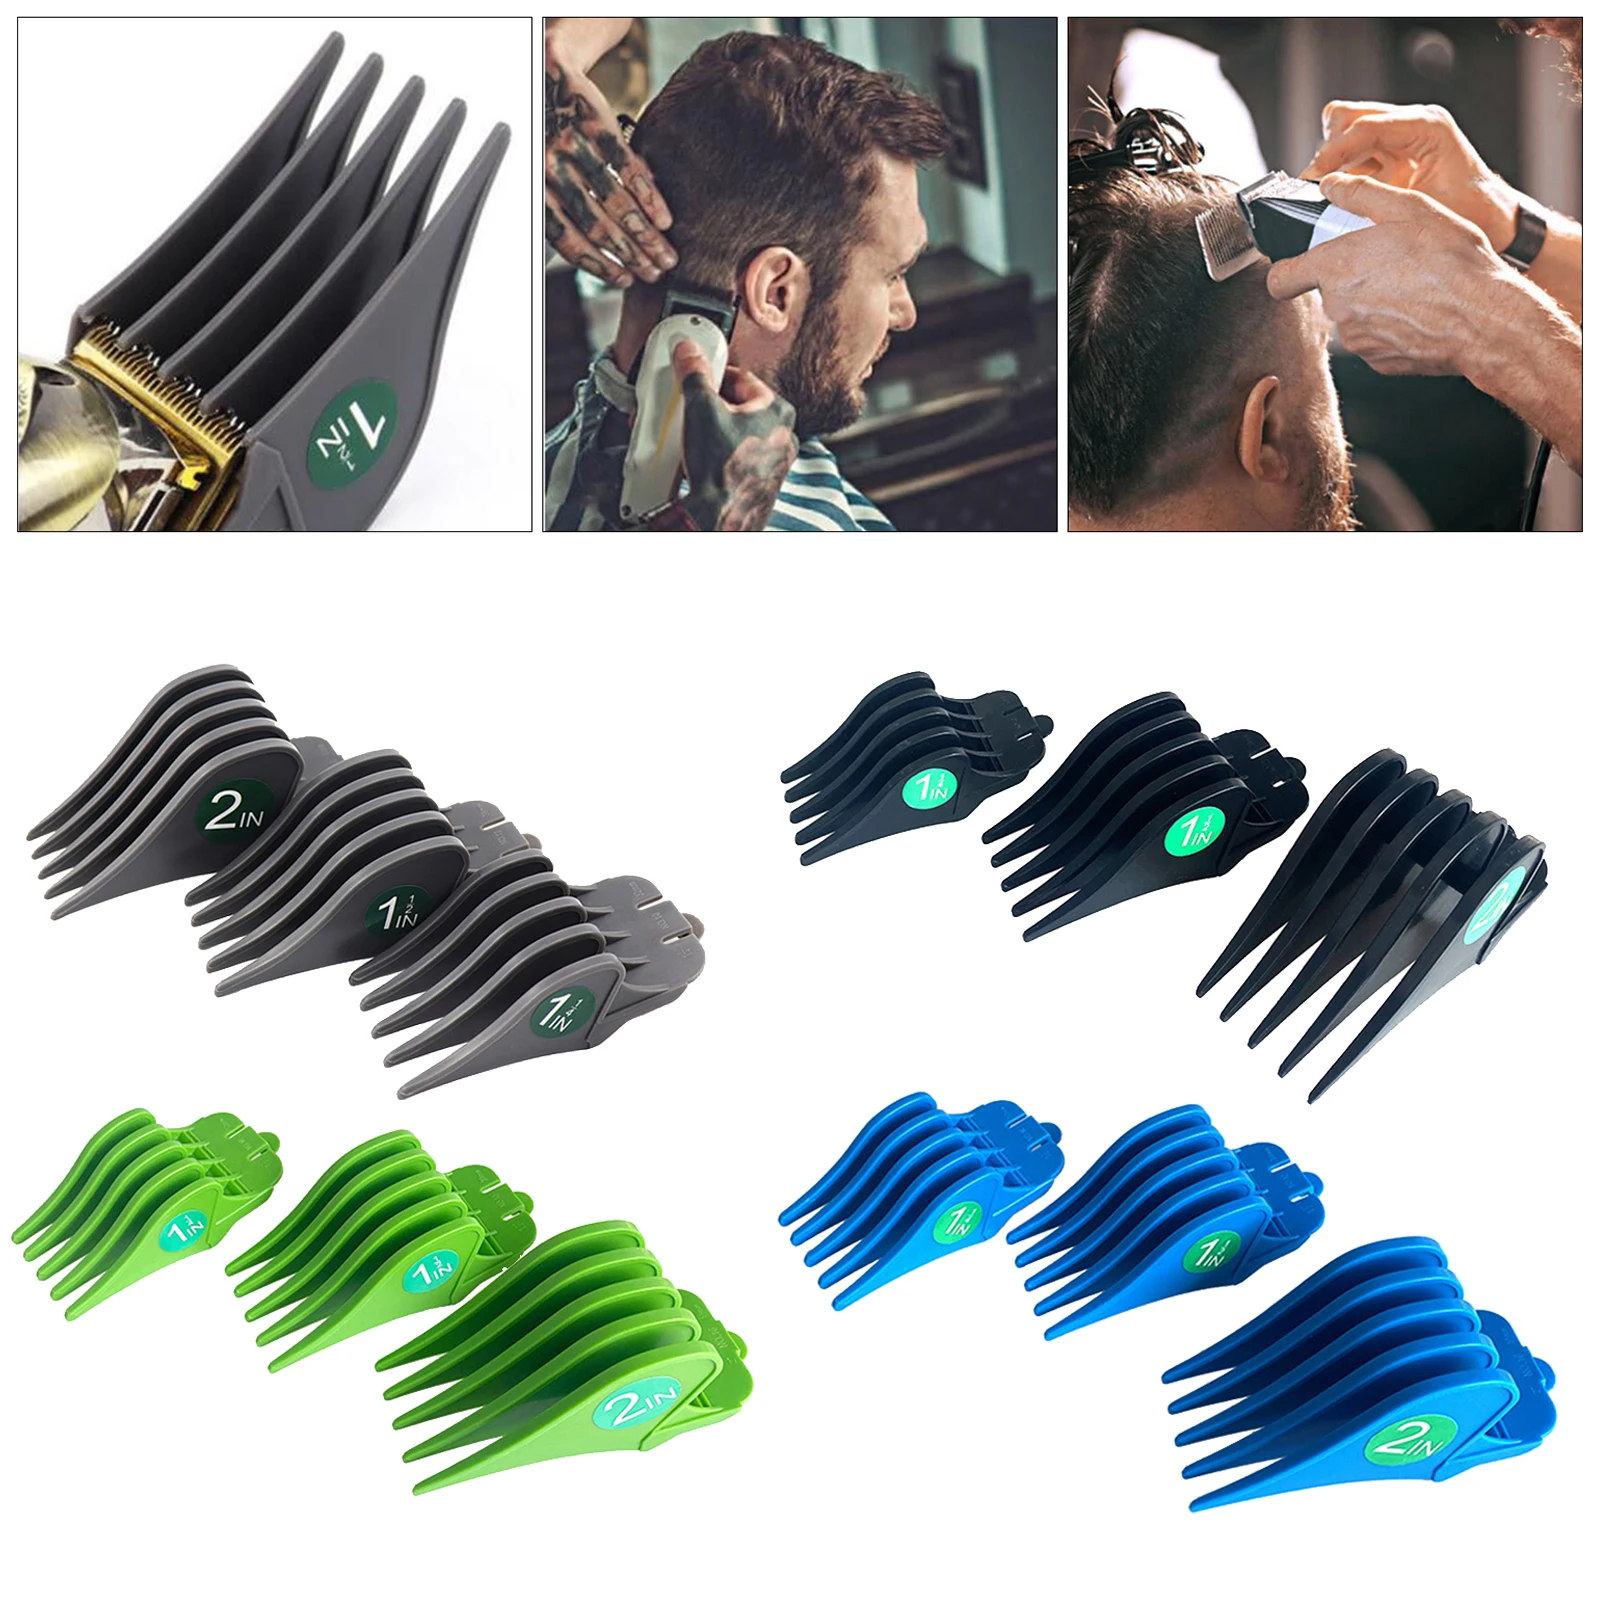 3Pcs/Set Replacement Hair Clipper Guide Combs Cutting Guides Attachment Clipper Guard Combs Attachment Replacement Tool